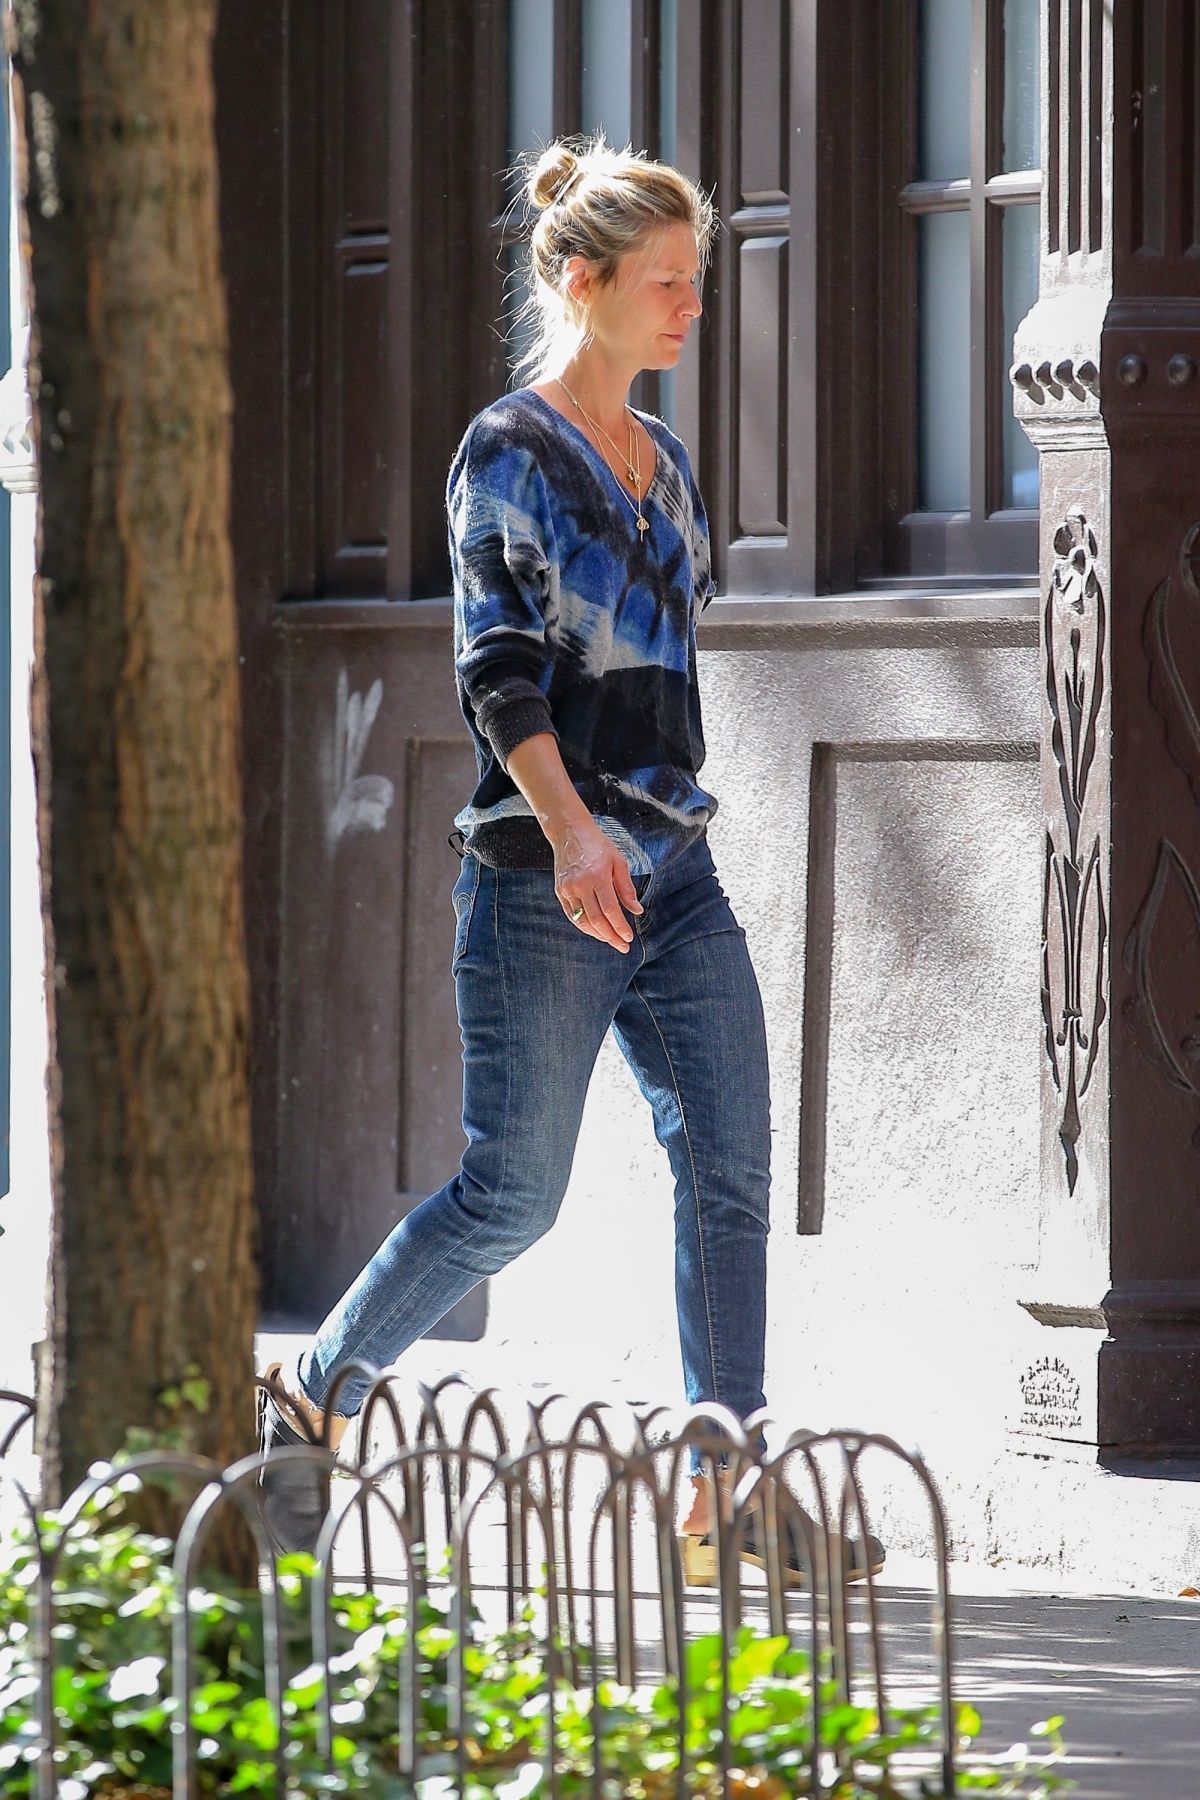 claire-danes-out-shopping-in-new-york-10-08-2020-4.jpg